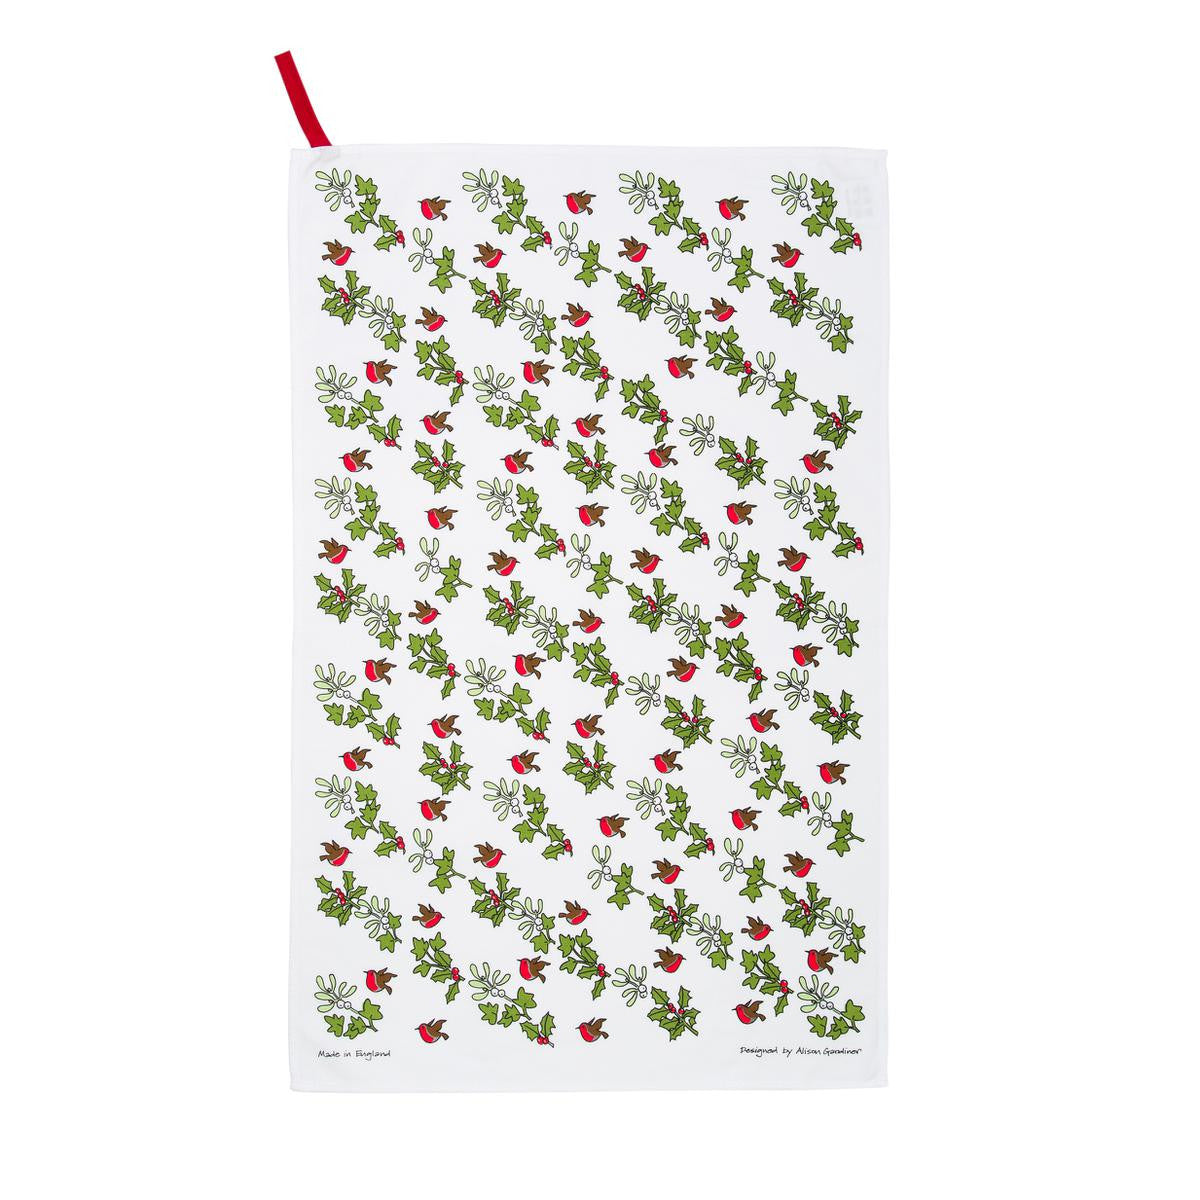 Holly & Ivy cotton tea towel from Alison Gardner.